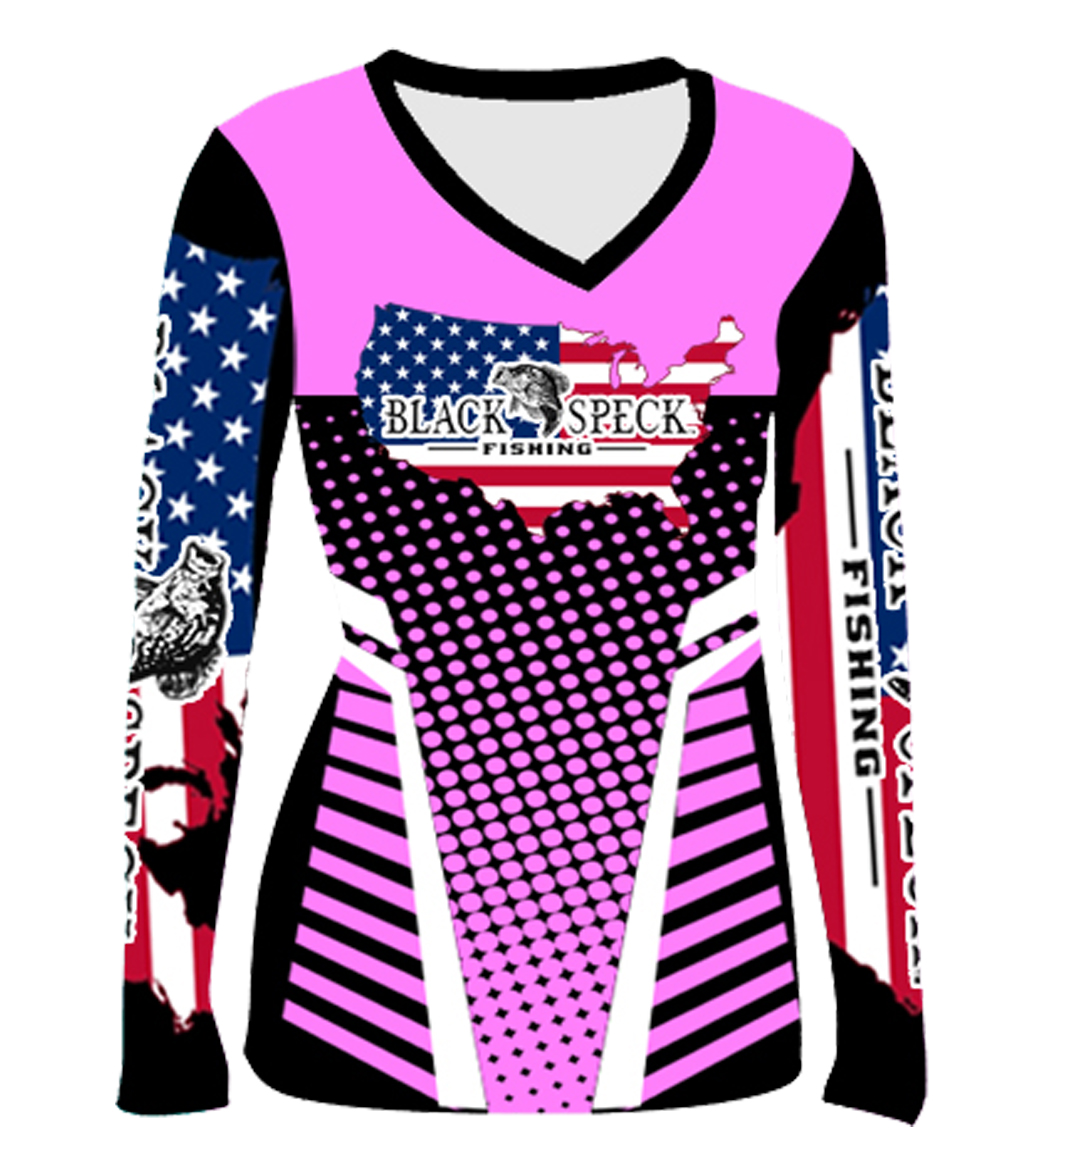 NEW CUSTOM-MADE SUN PROTECTION TOURNAMENT JERSEY- PINK FLAG - Black Speck